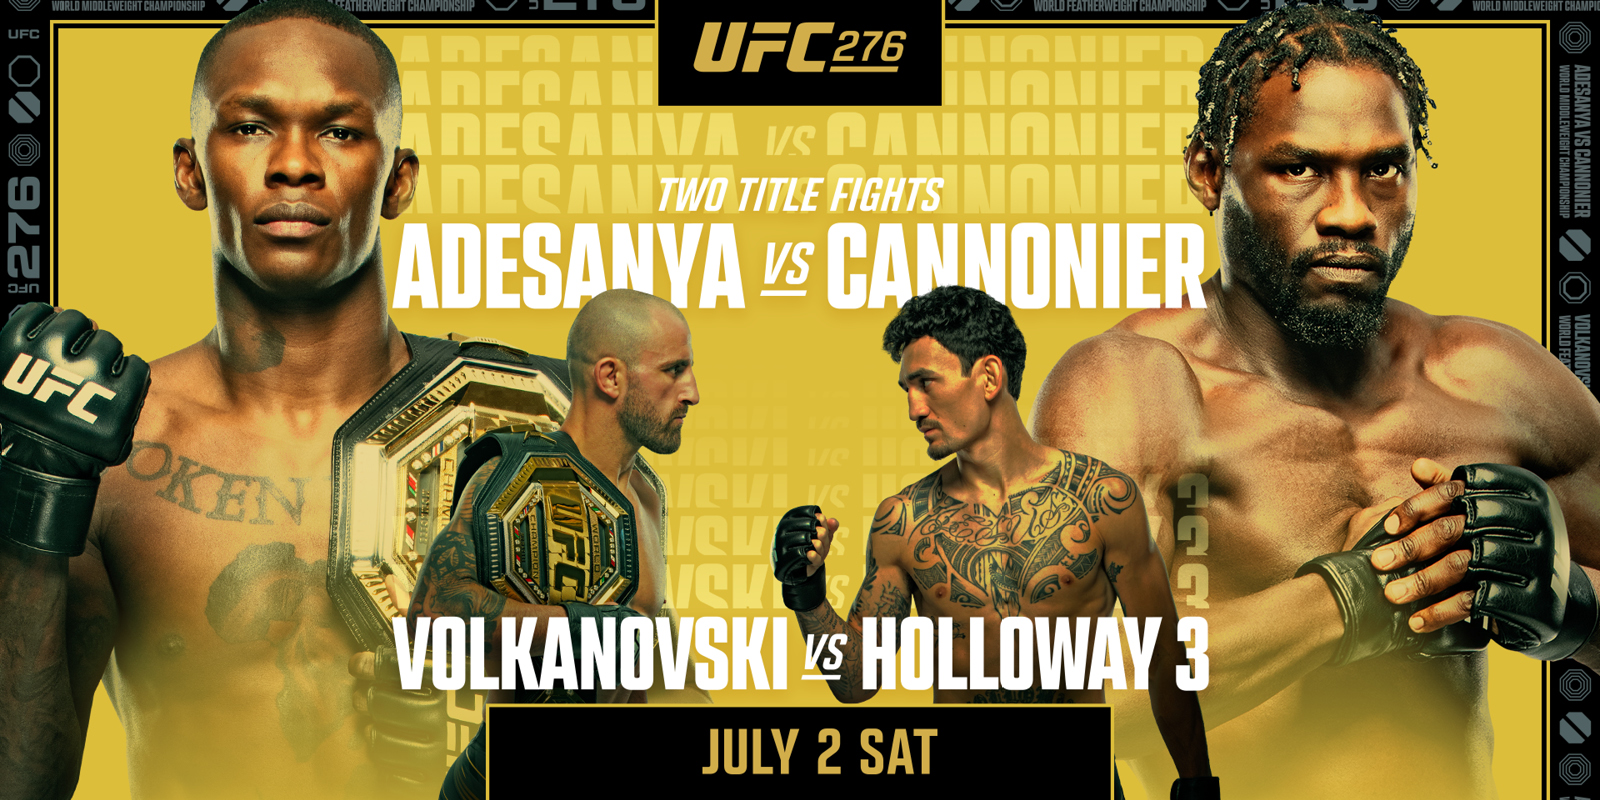 volkanovski vs holloway 3 visual to promote the closed-circuit viewing at chickie's and pete's. shows the two fighters looking at each other with a yellow background